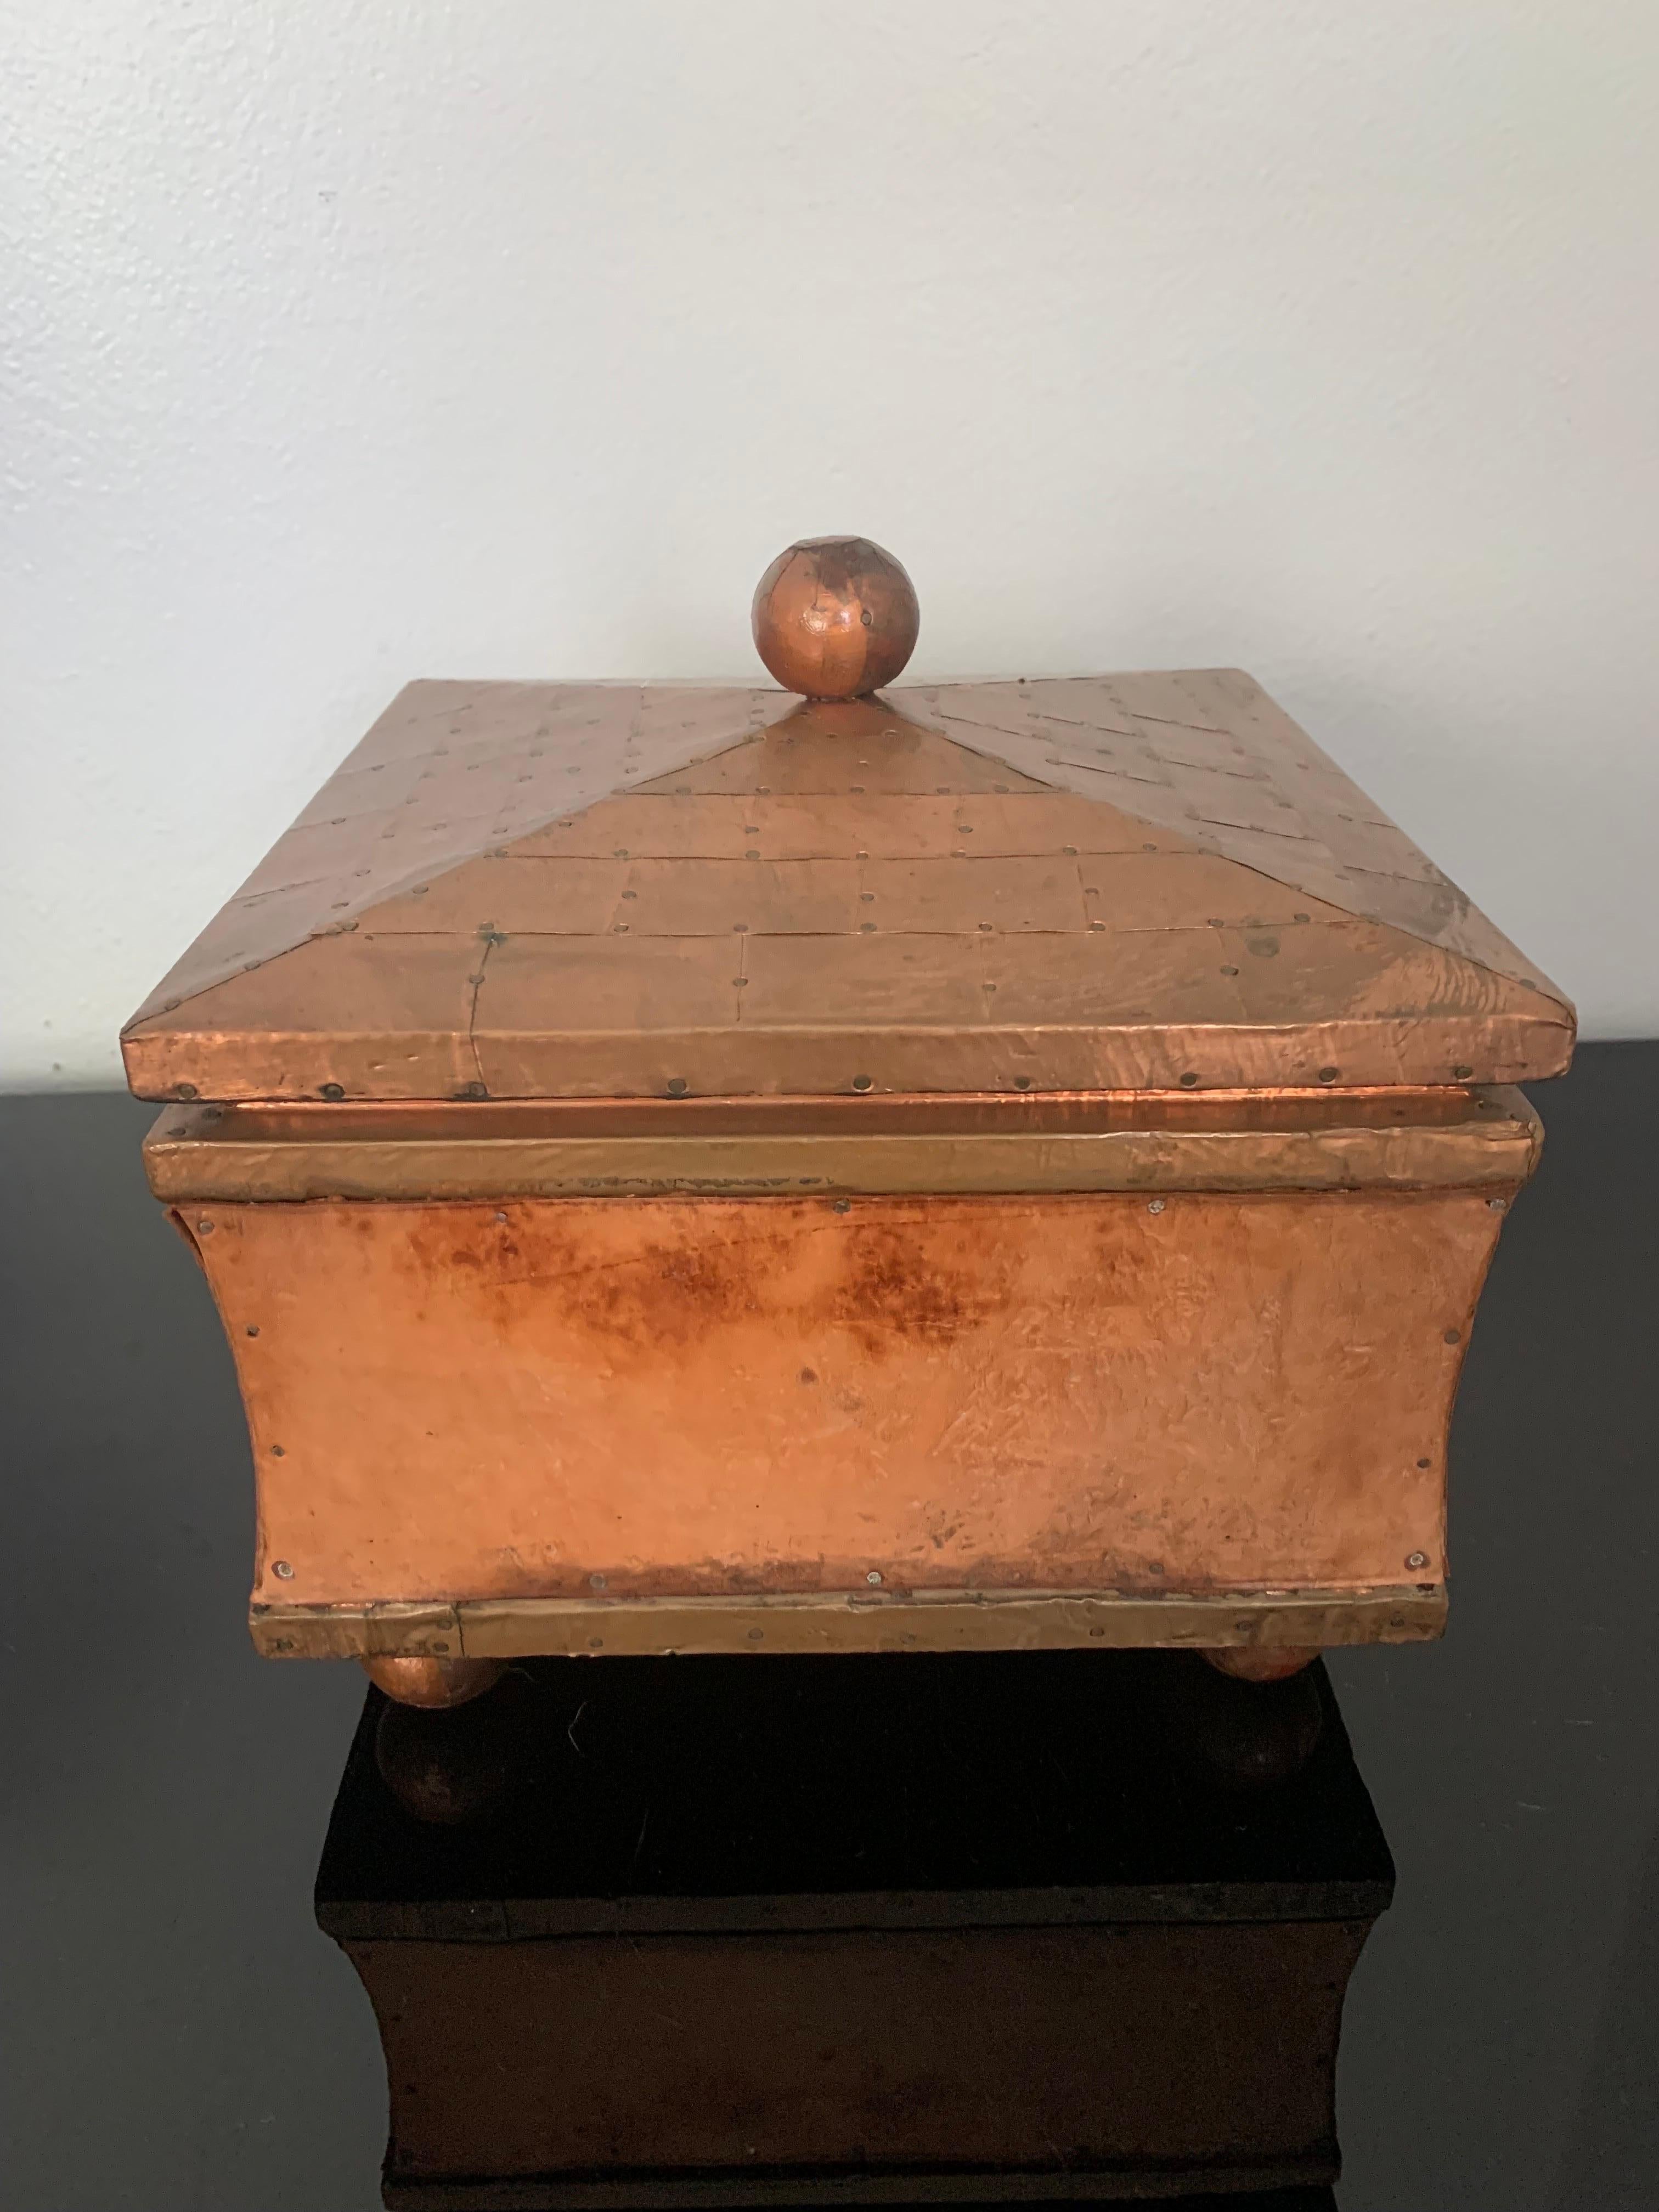 Beautiful copper and leather wrapped decorative box in the manner of Karl Springer. 

Skeleton of the box is wood. Top and edges consists of shingled cut copper squares affixed with copper nails. Sides of the box are wrapped with a tough leather